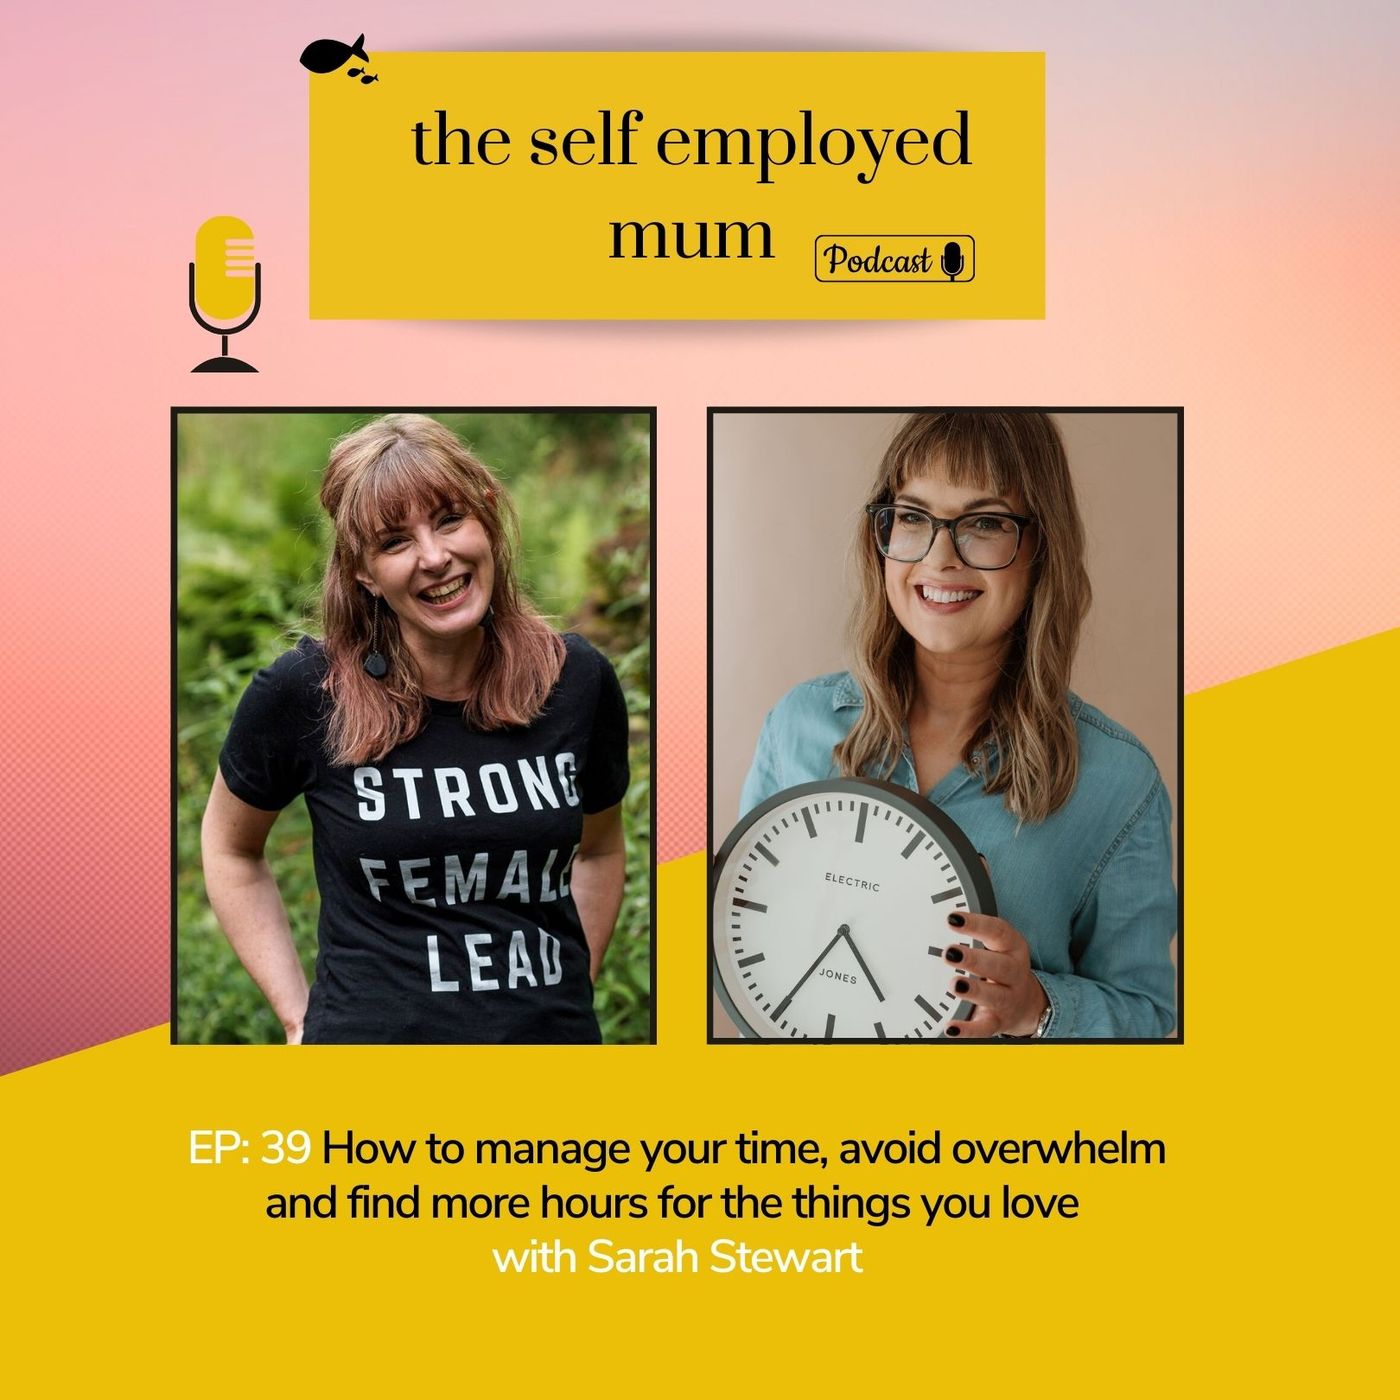 EP: 39  How to manage your time and find more hours for the things you love with Sarah Stewart